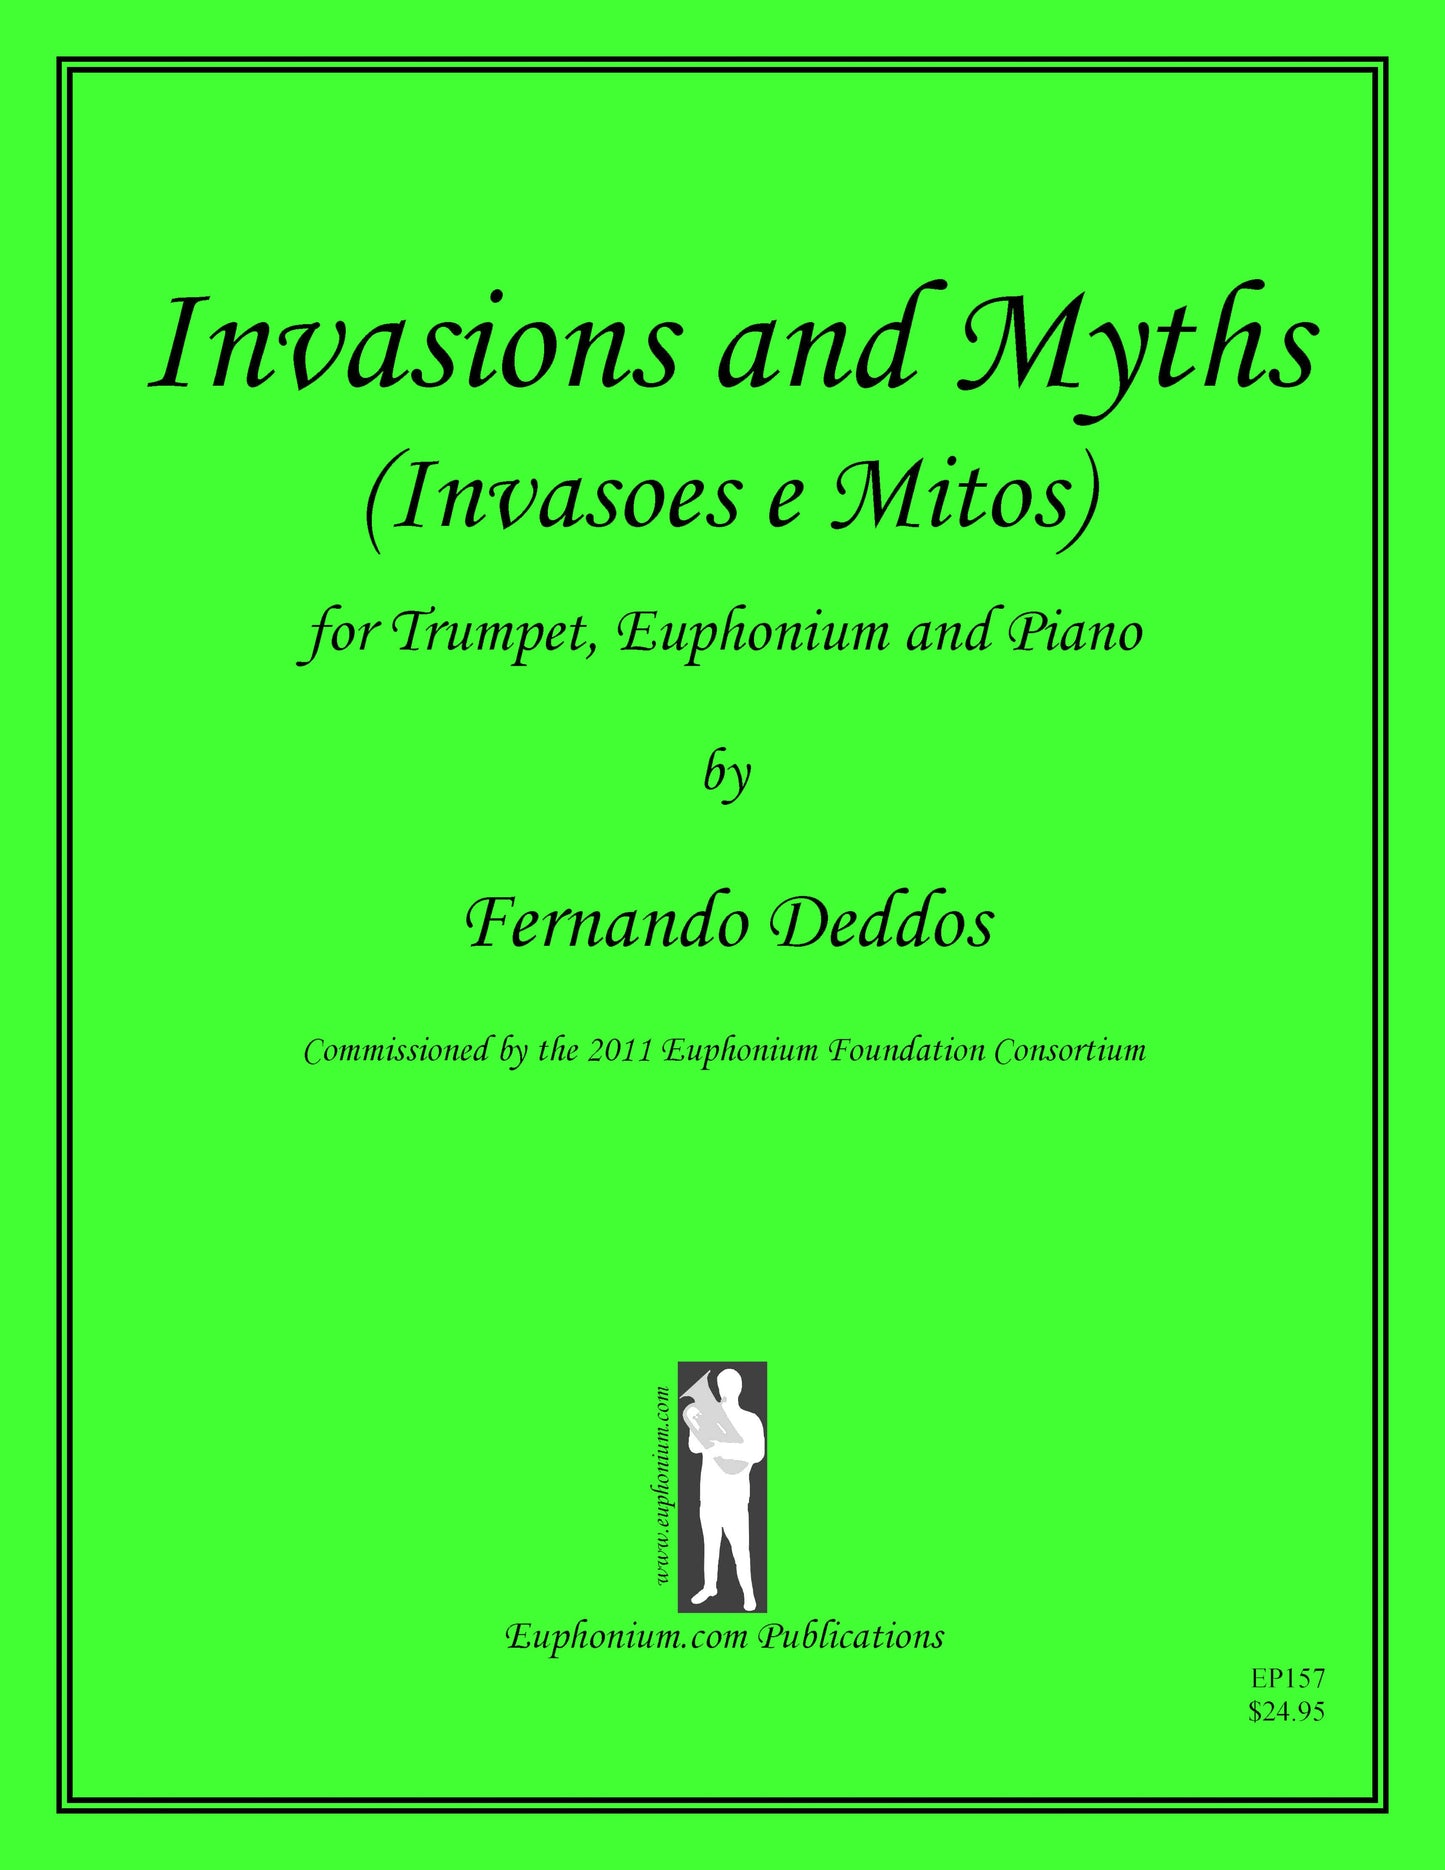 Deddos - Invasions and Myths - DOWNLOAD